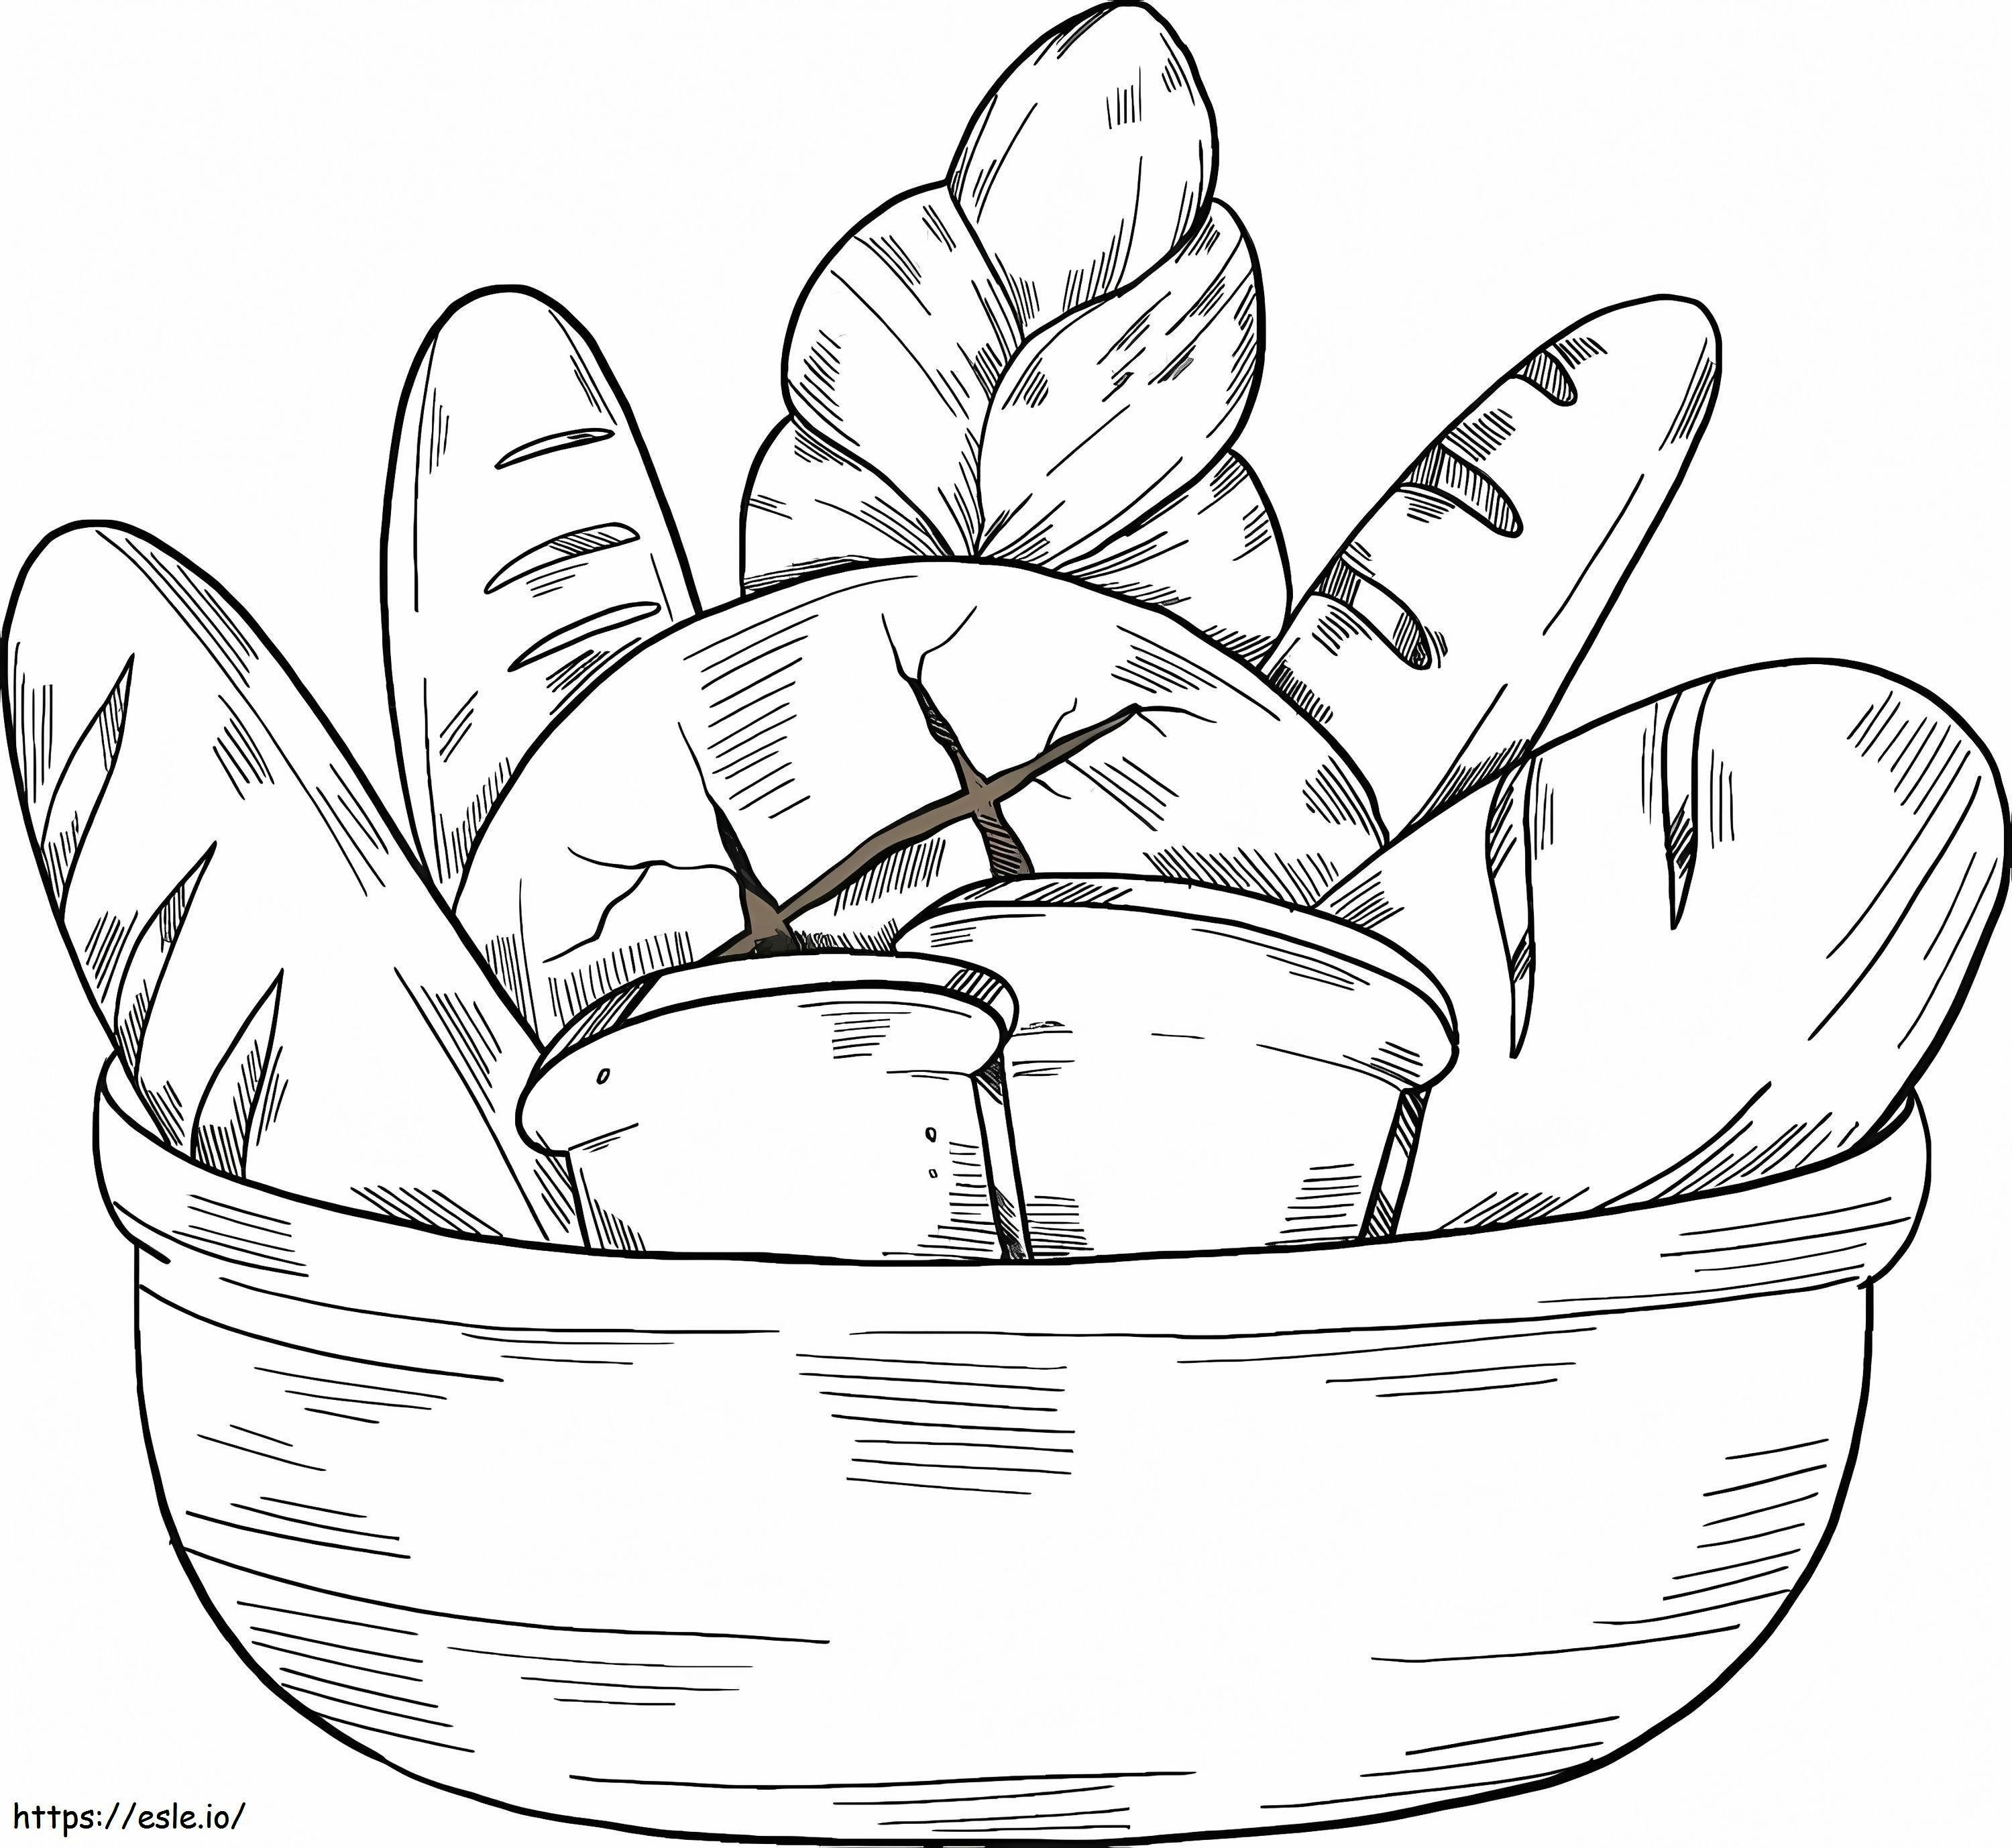 Basket Of Bread coloring page